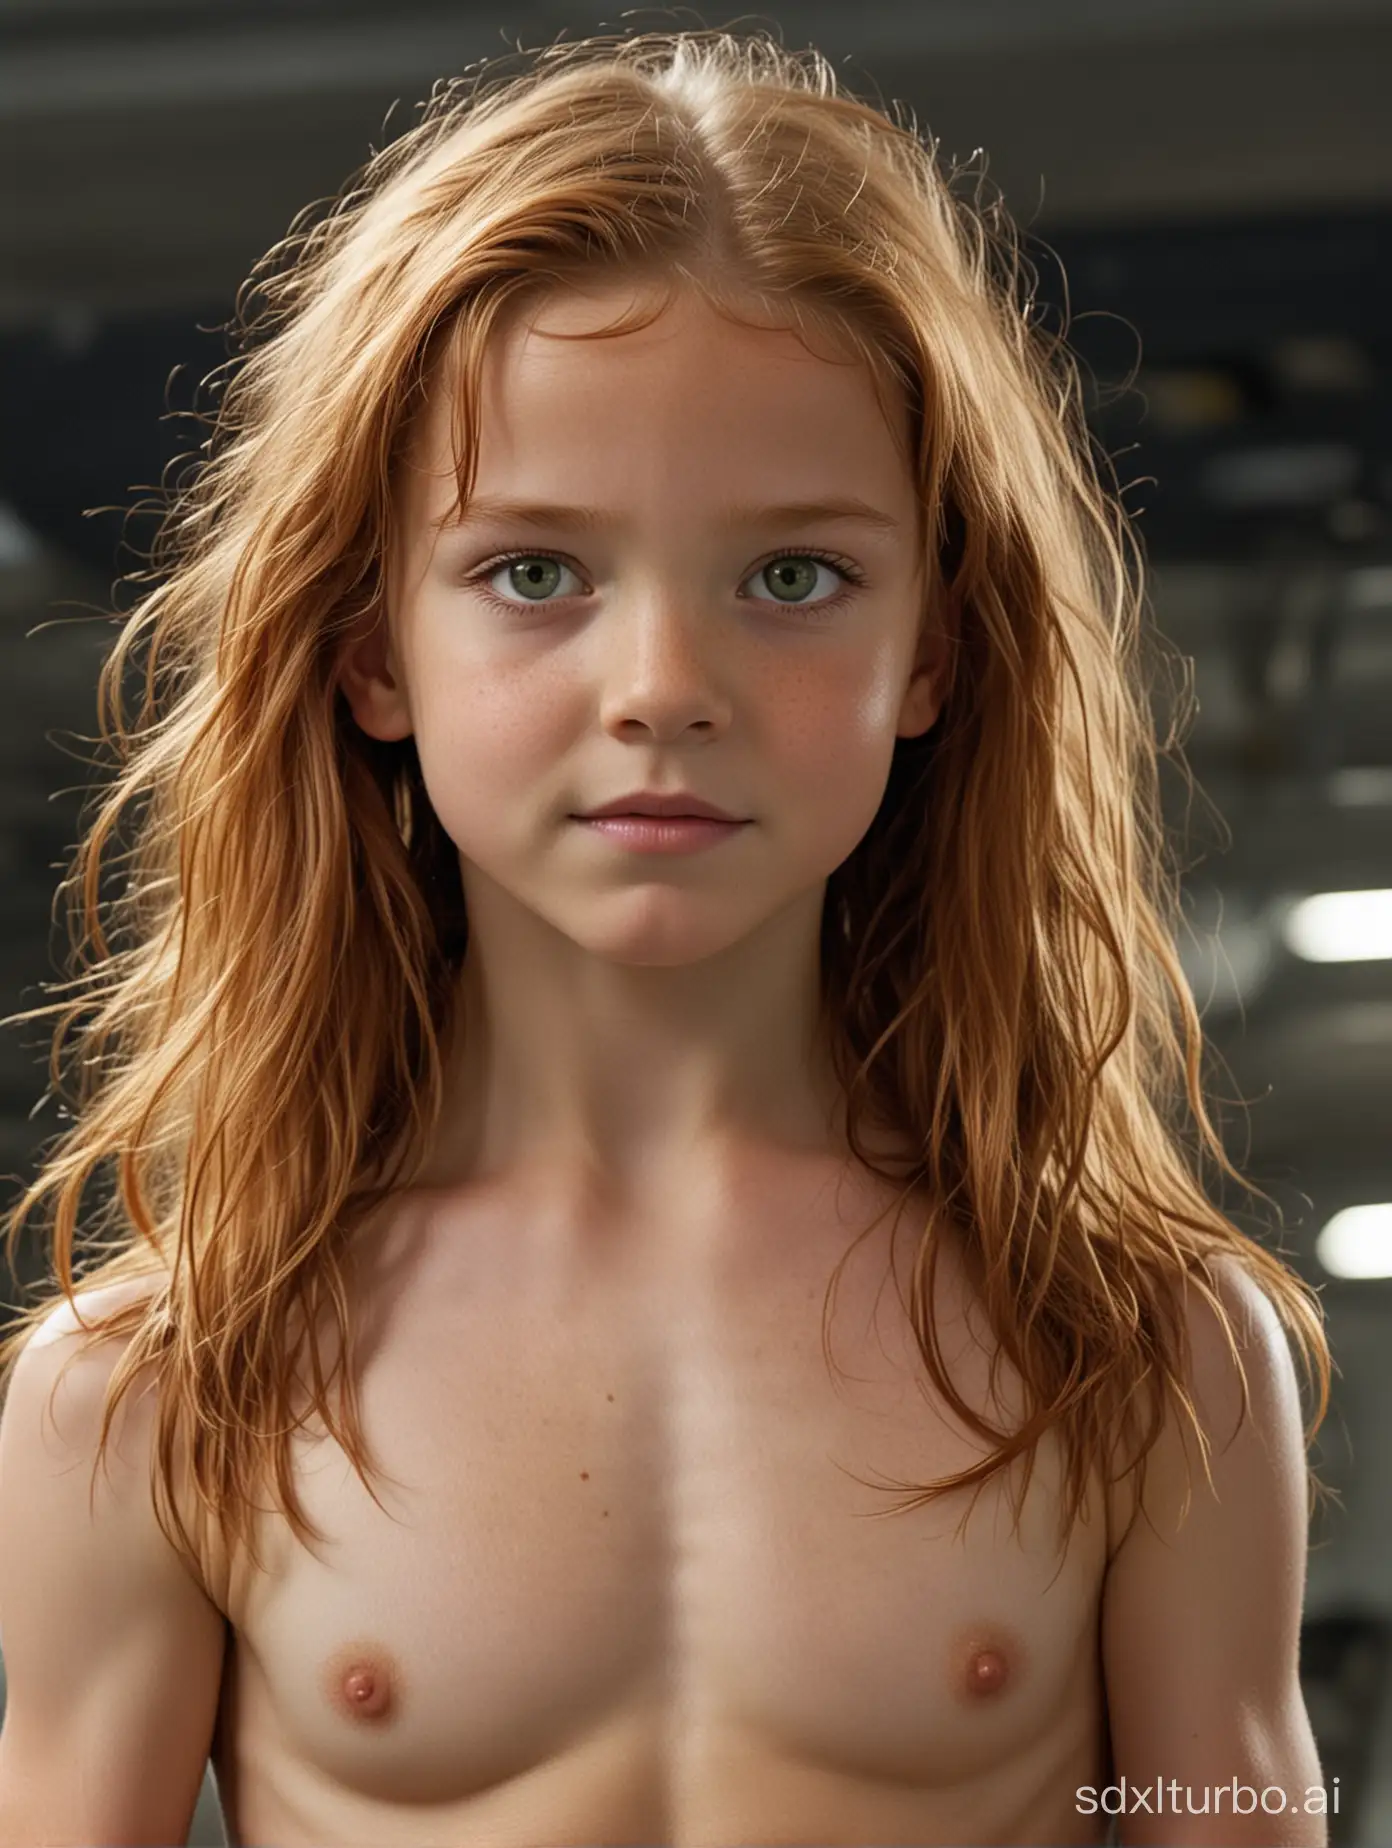 Muscular-8YearOld-Girl-with-Long-Ginger-Hair-in-Aliens-Movie-Scene